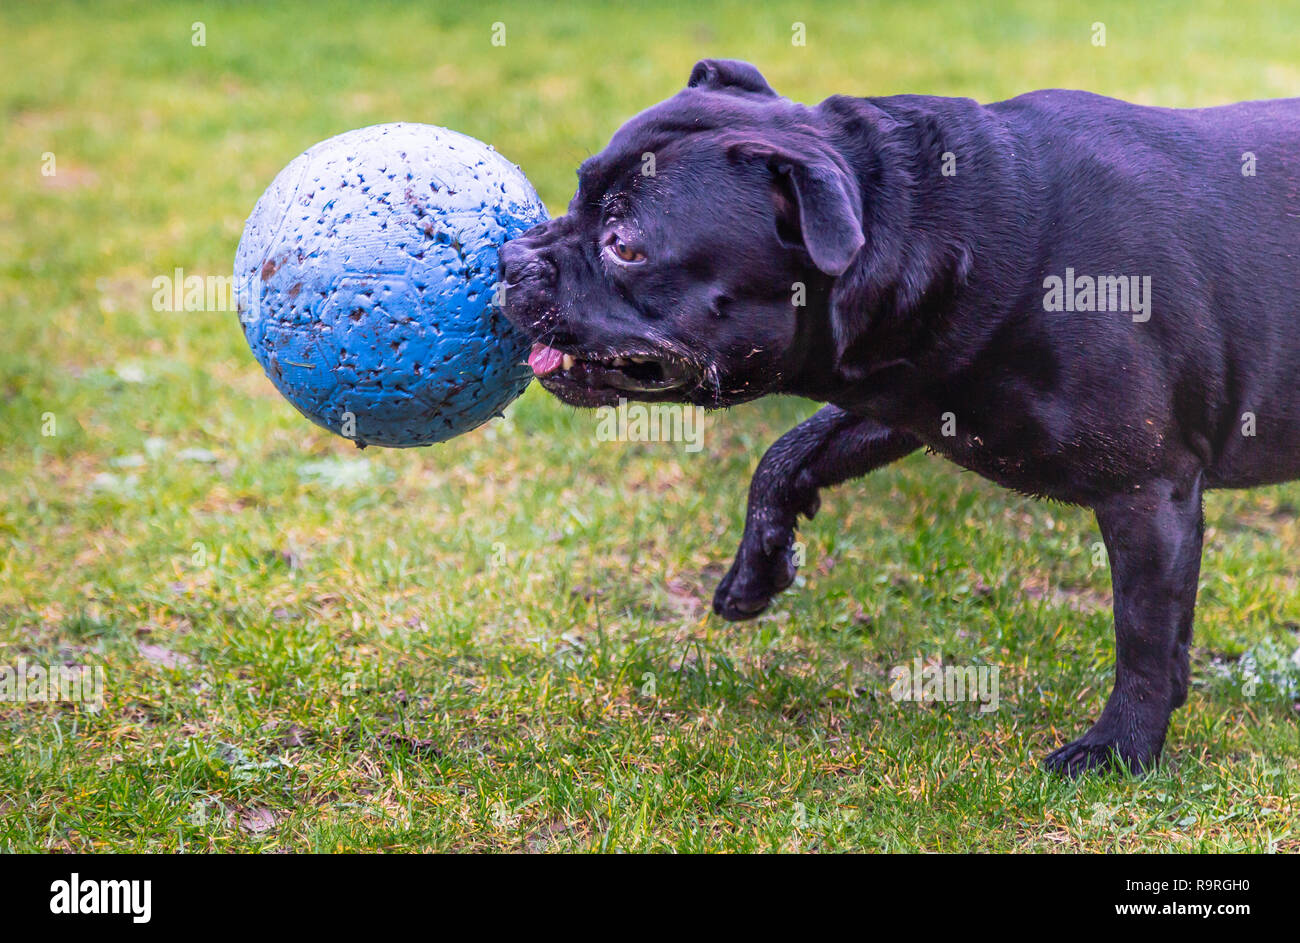 Staffordshire bull terrier dog running and playing on muddy grass with a large blue ball in his mouth Stock Photo